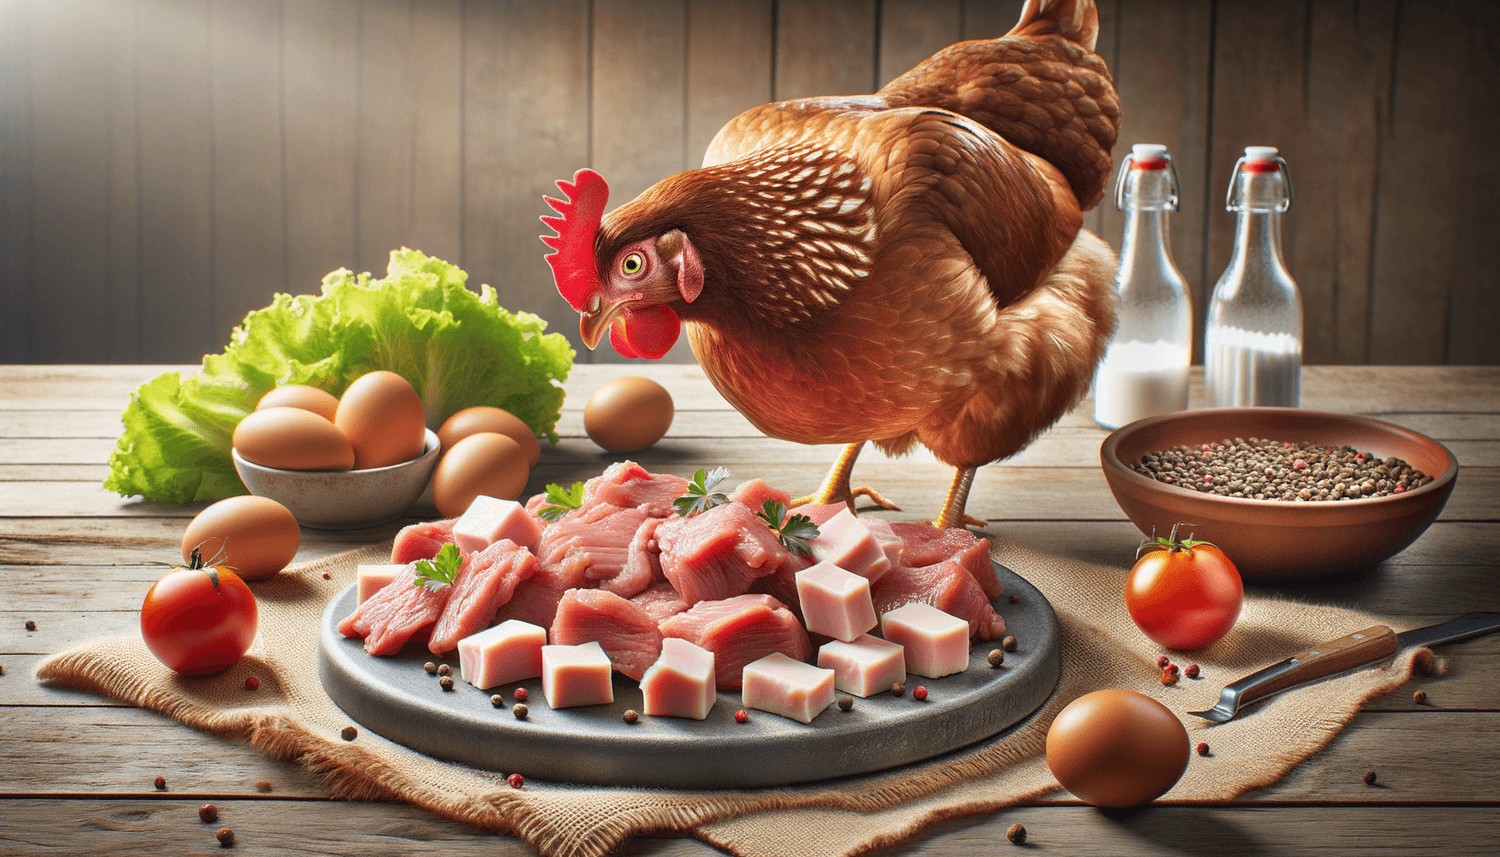 Can Chickens Eat Beef Fat?